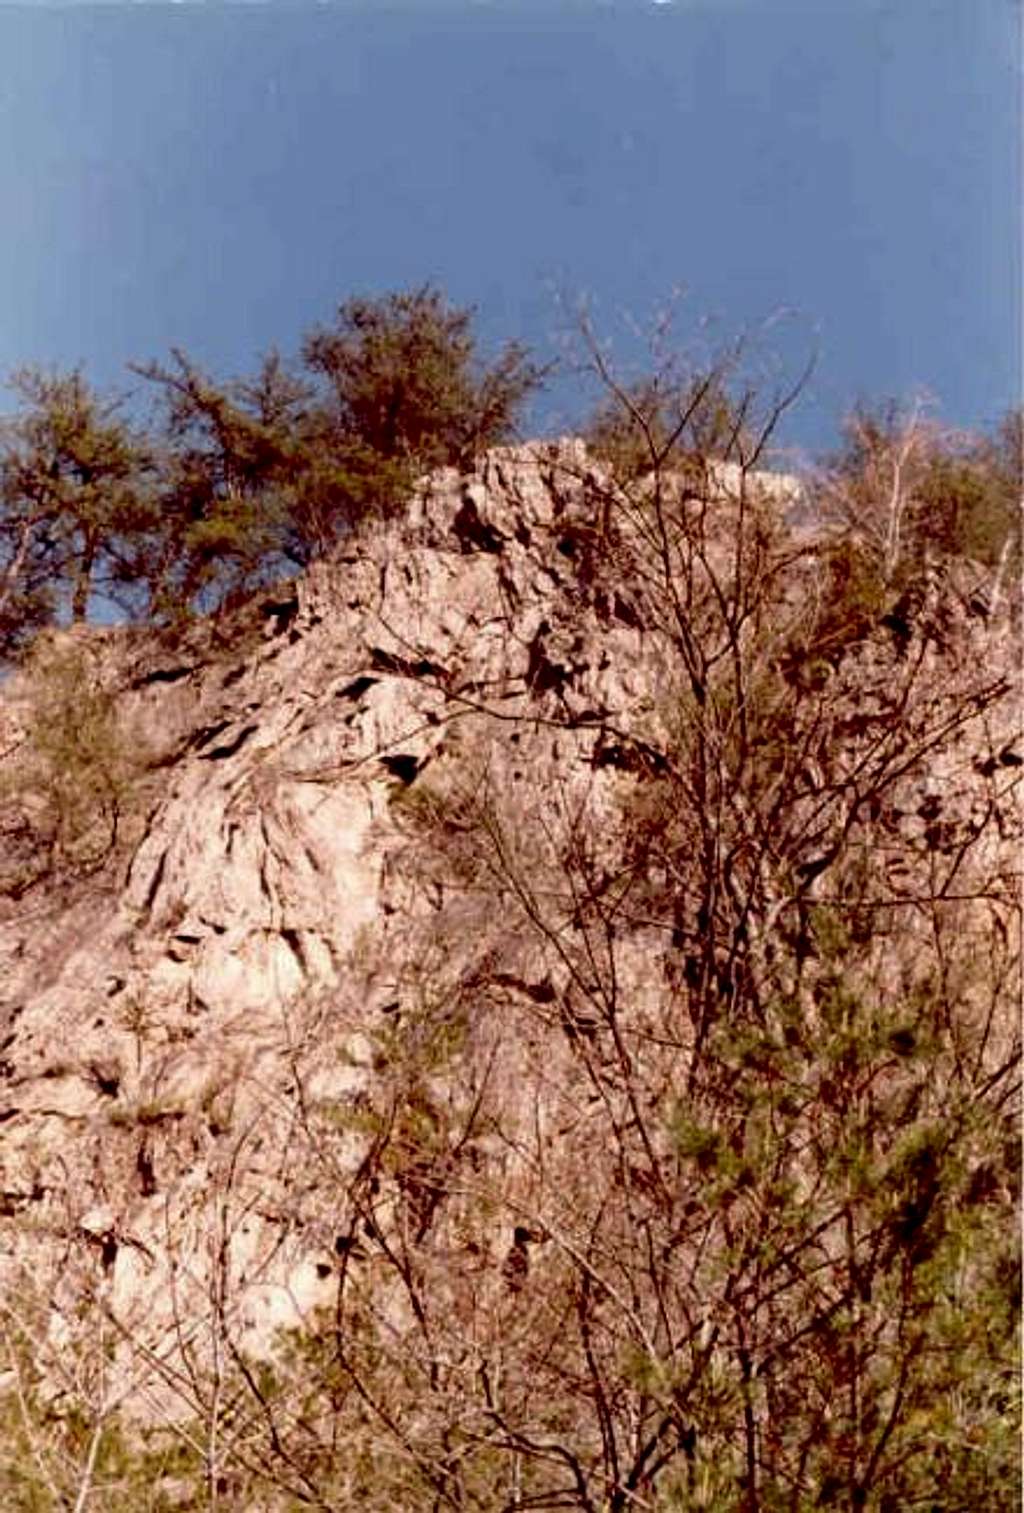 Another cliff face.
